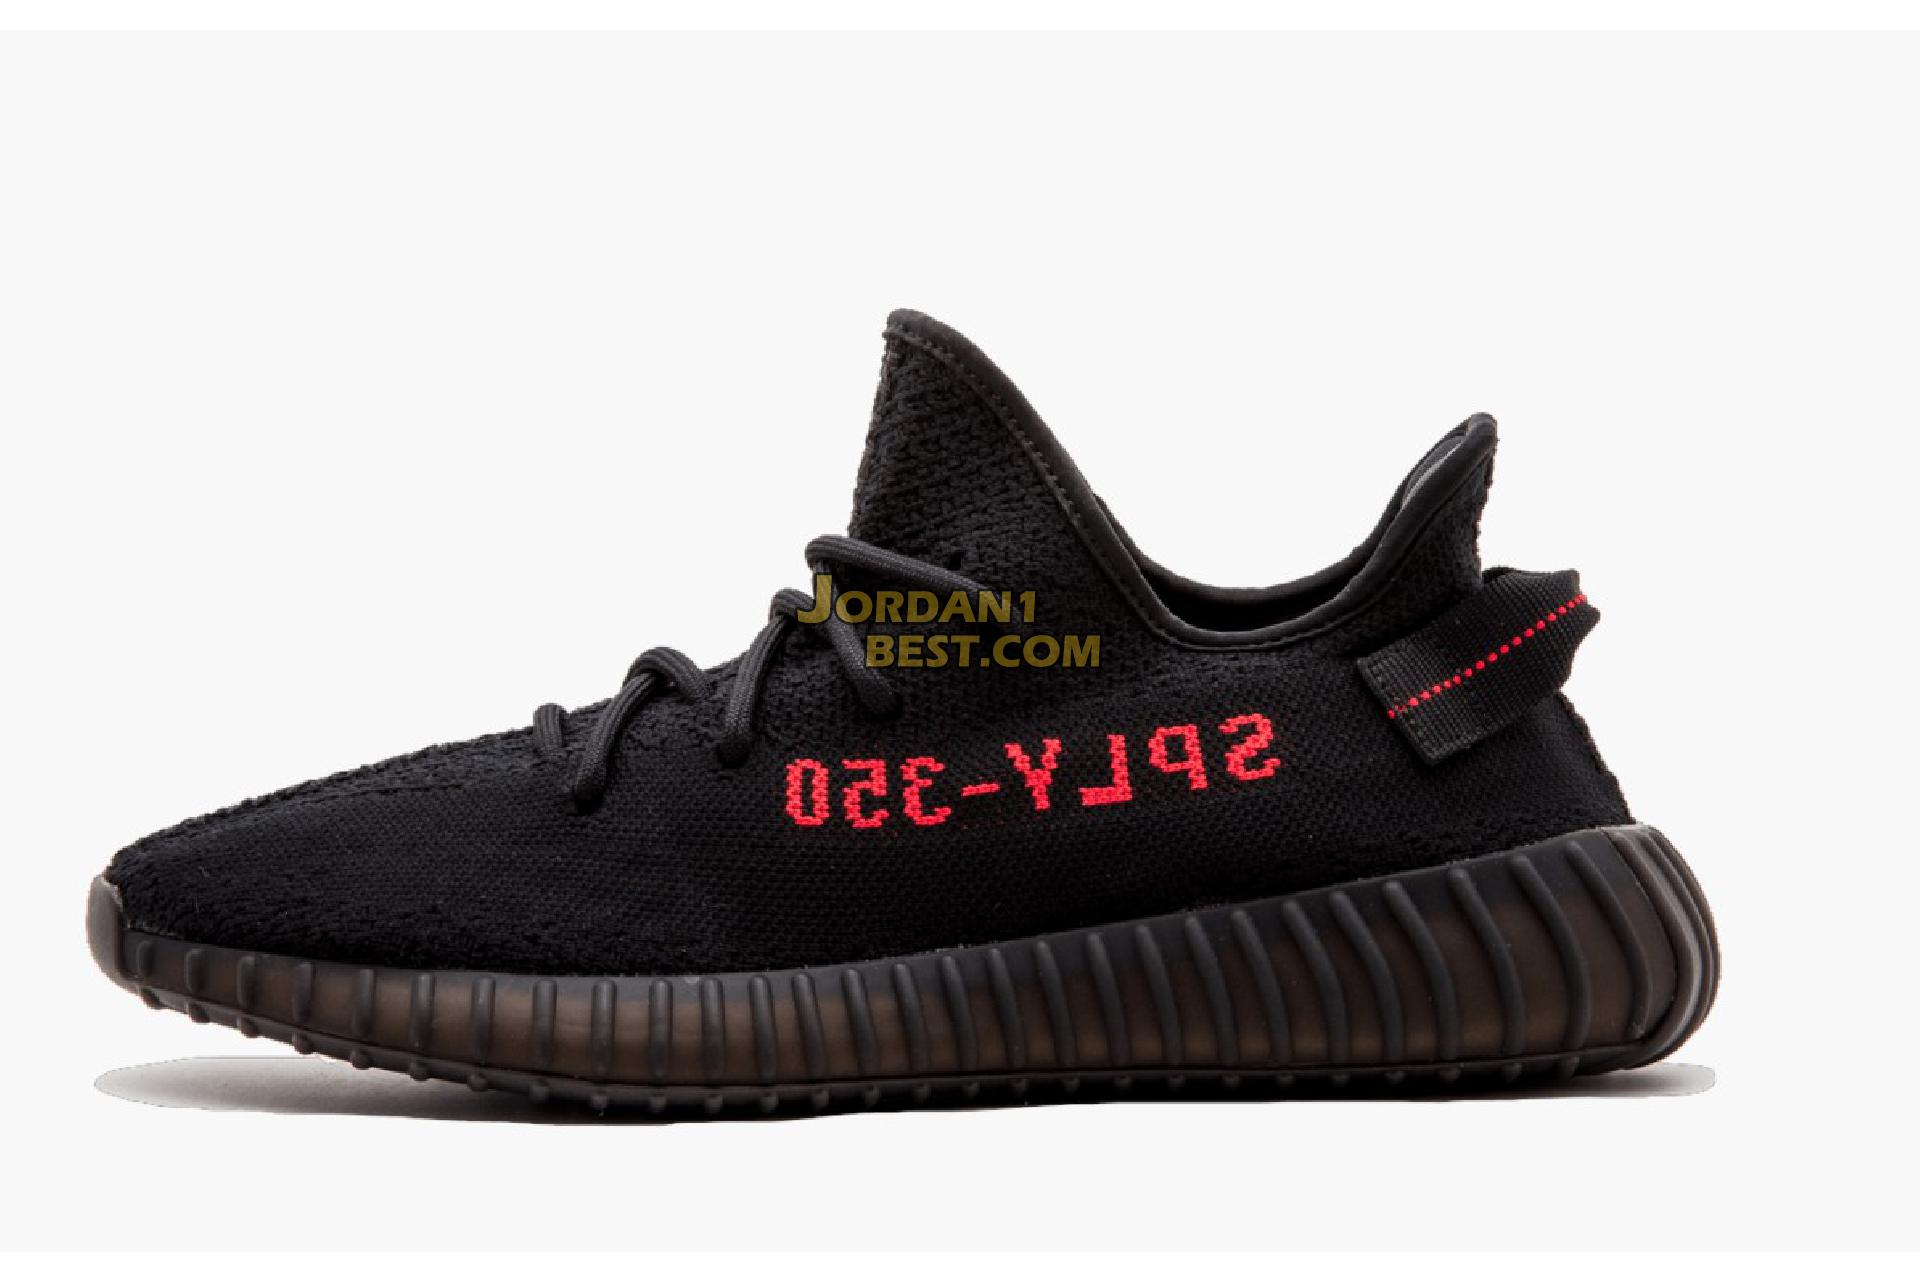 Adidas Yeezy Boost 350 V2 "Bred" CP9652